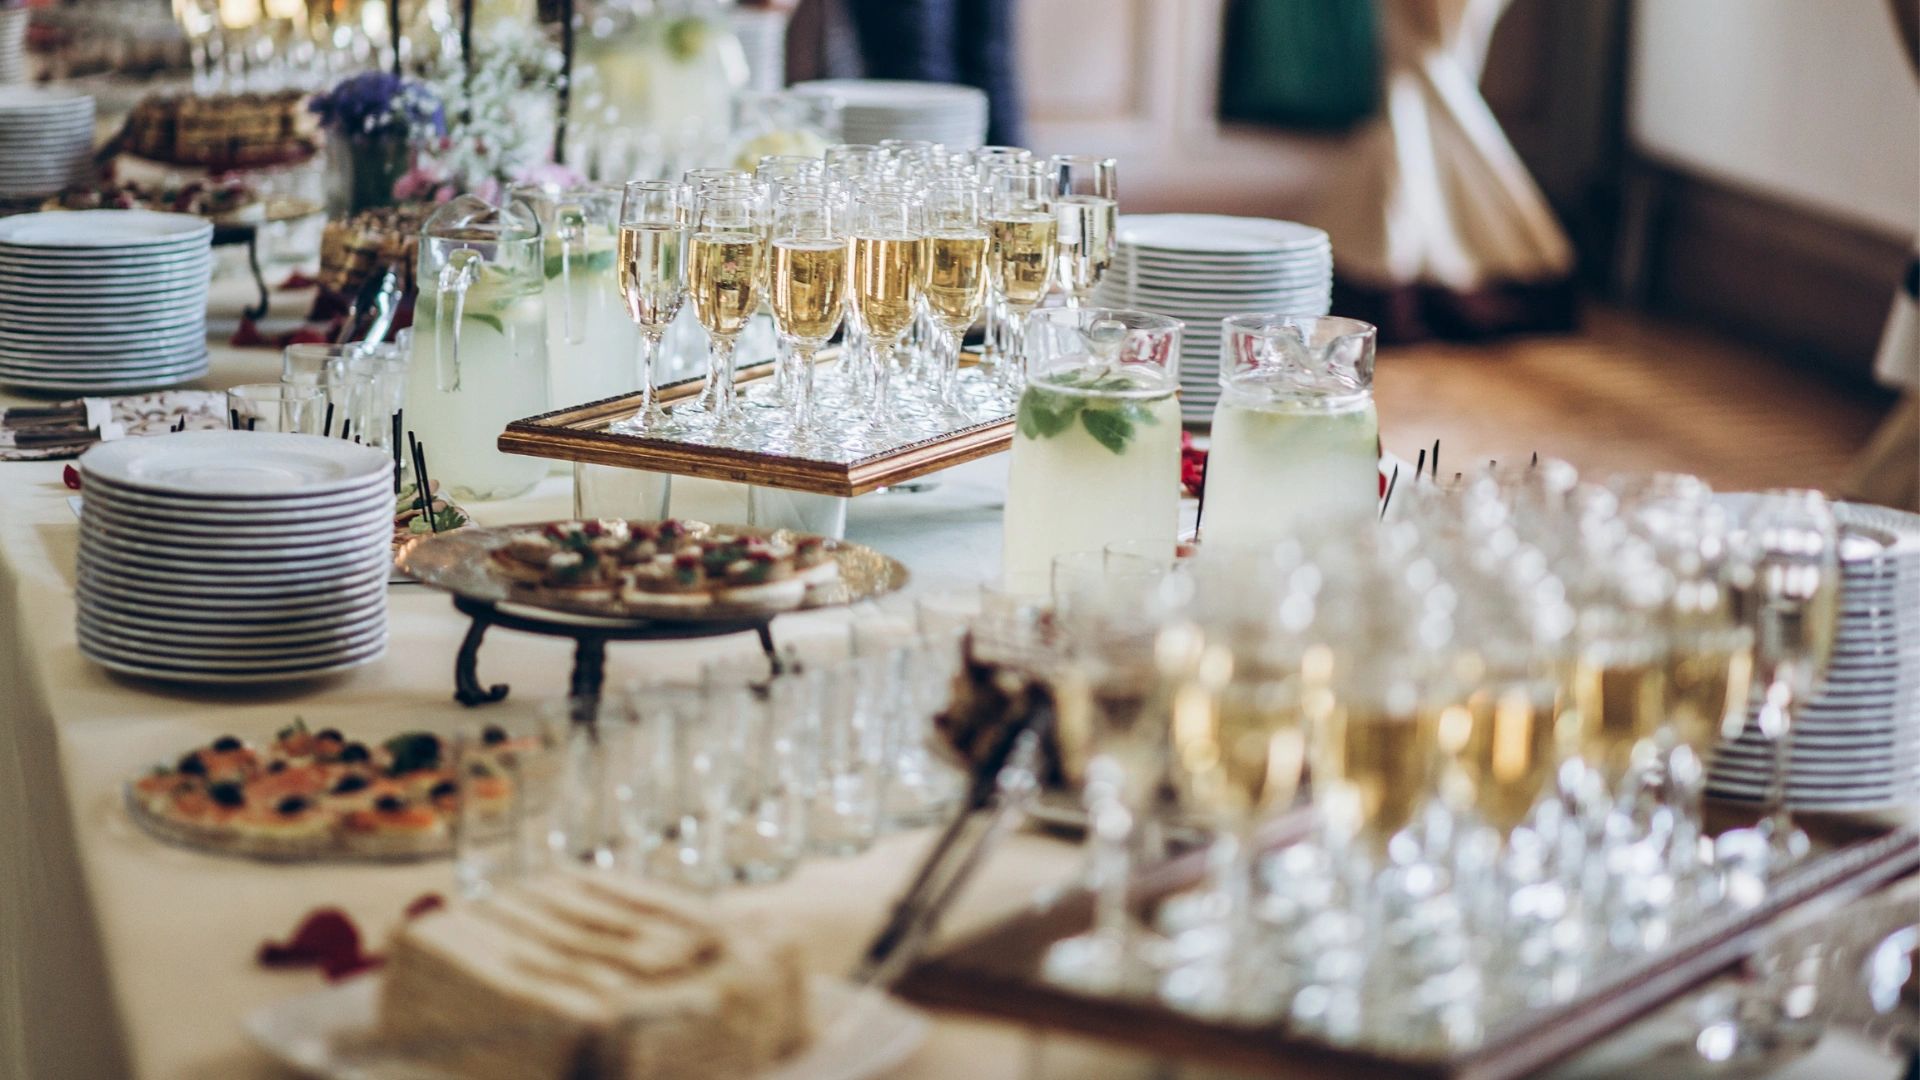 alcoholic drinks and finger food on display on a table, for an event